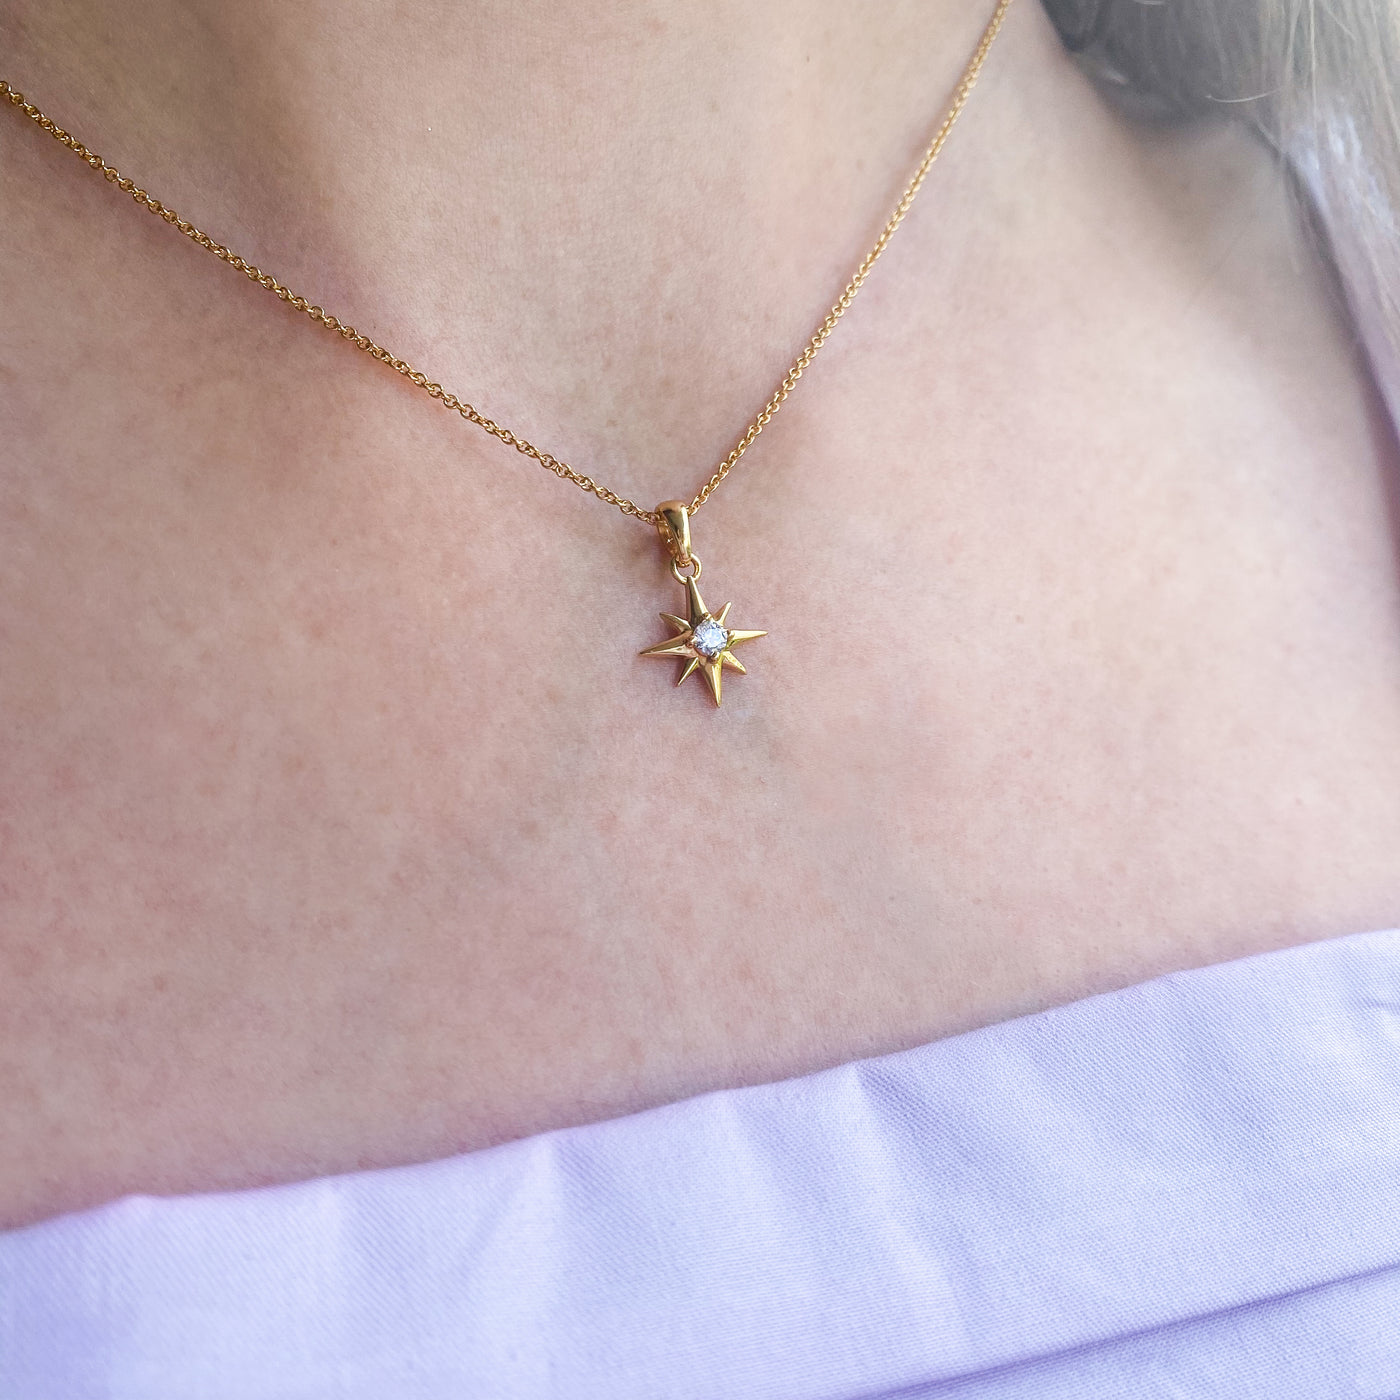 Gold star necklace with CZ crystal